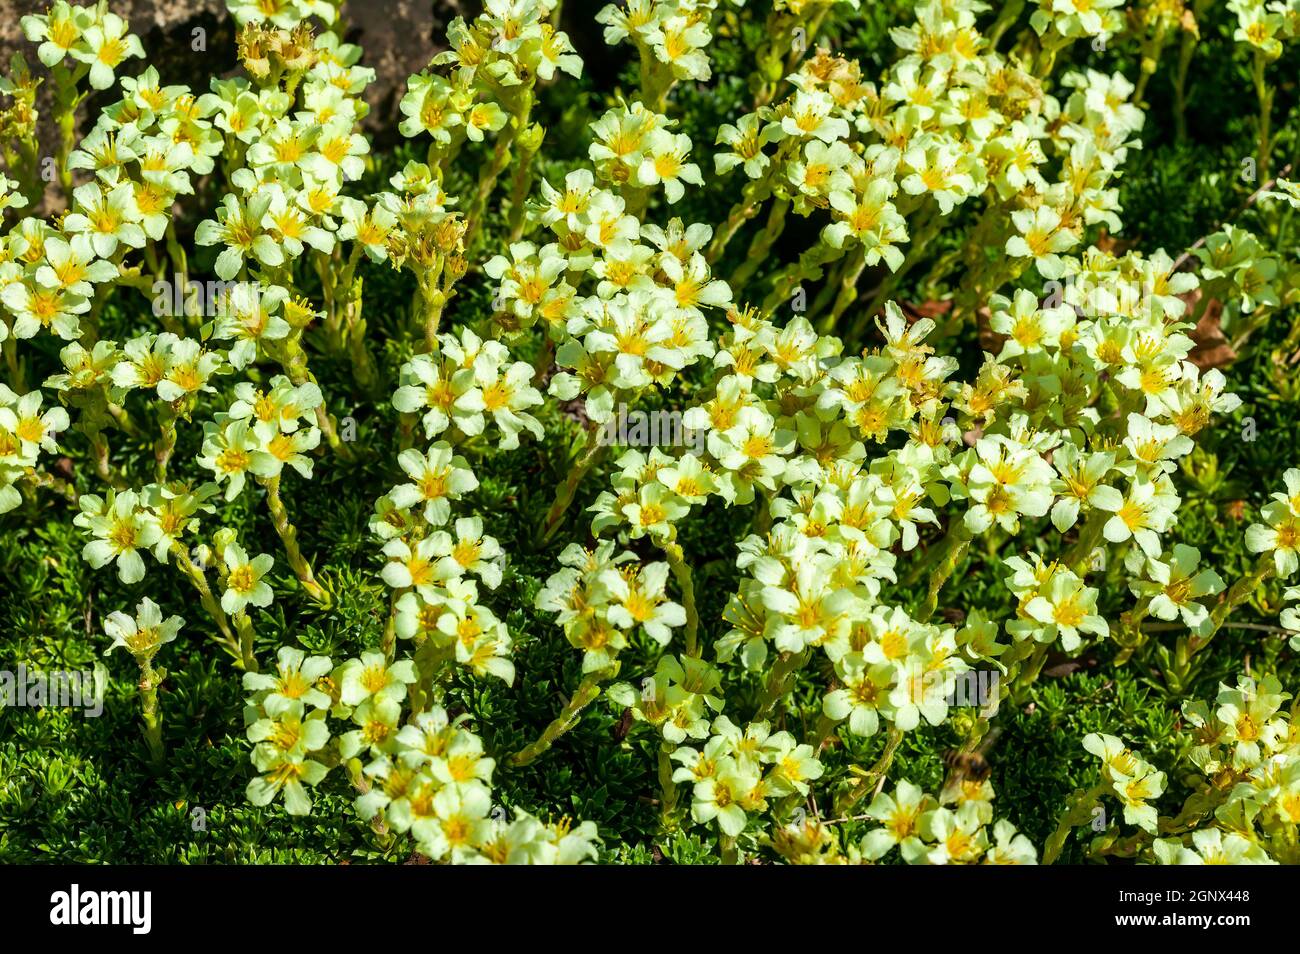 Saxifraga apiculata a  spring flowering evergreen alpine plant with a white yellow springtime flower commonly known as saxifrage or rockfoil, stock ph Stock Photo